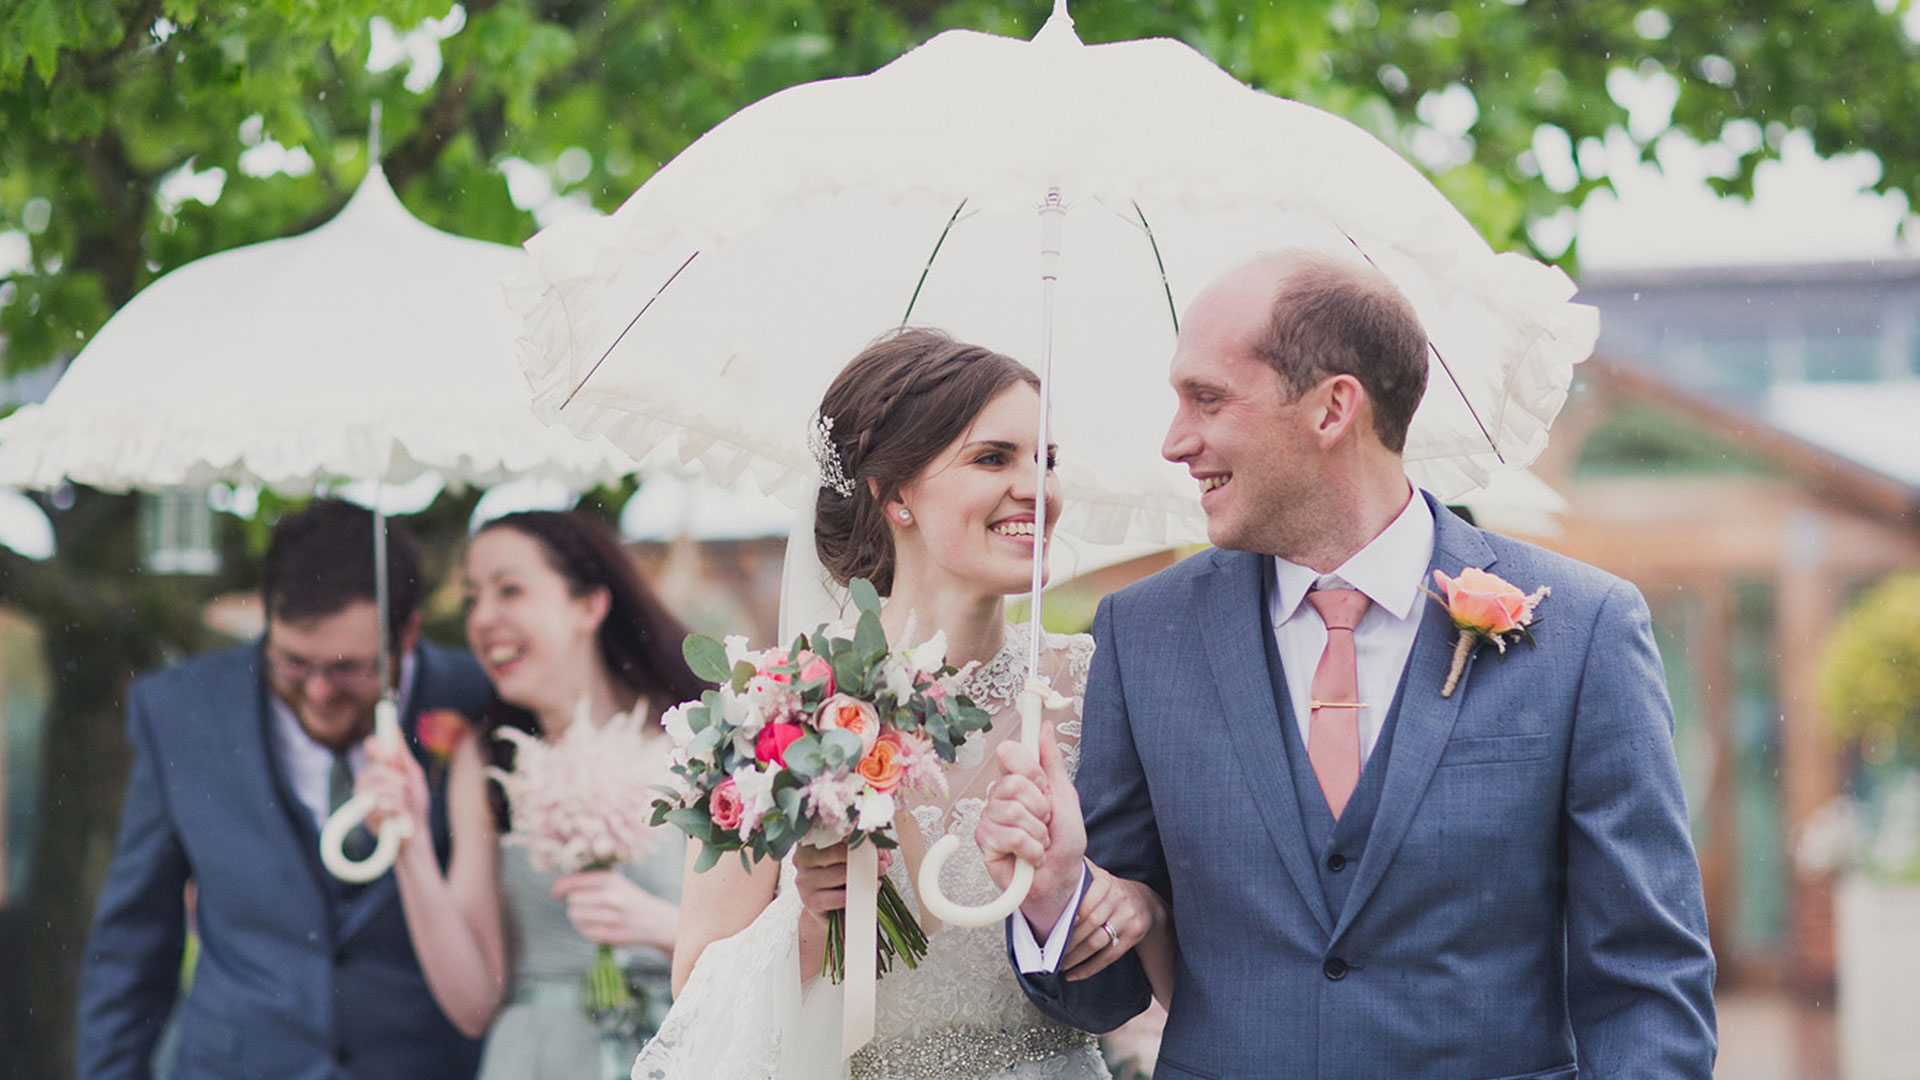 Wedding Umbrellas - The perfect accessory for your summer wedding